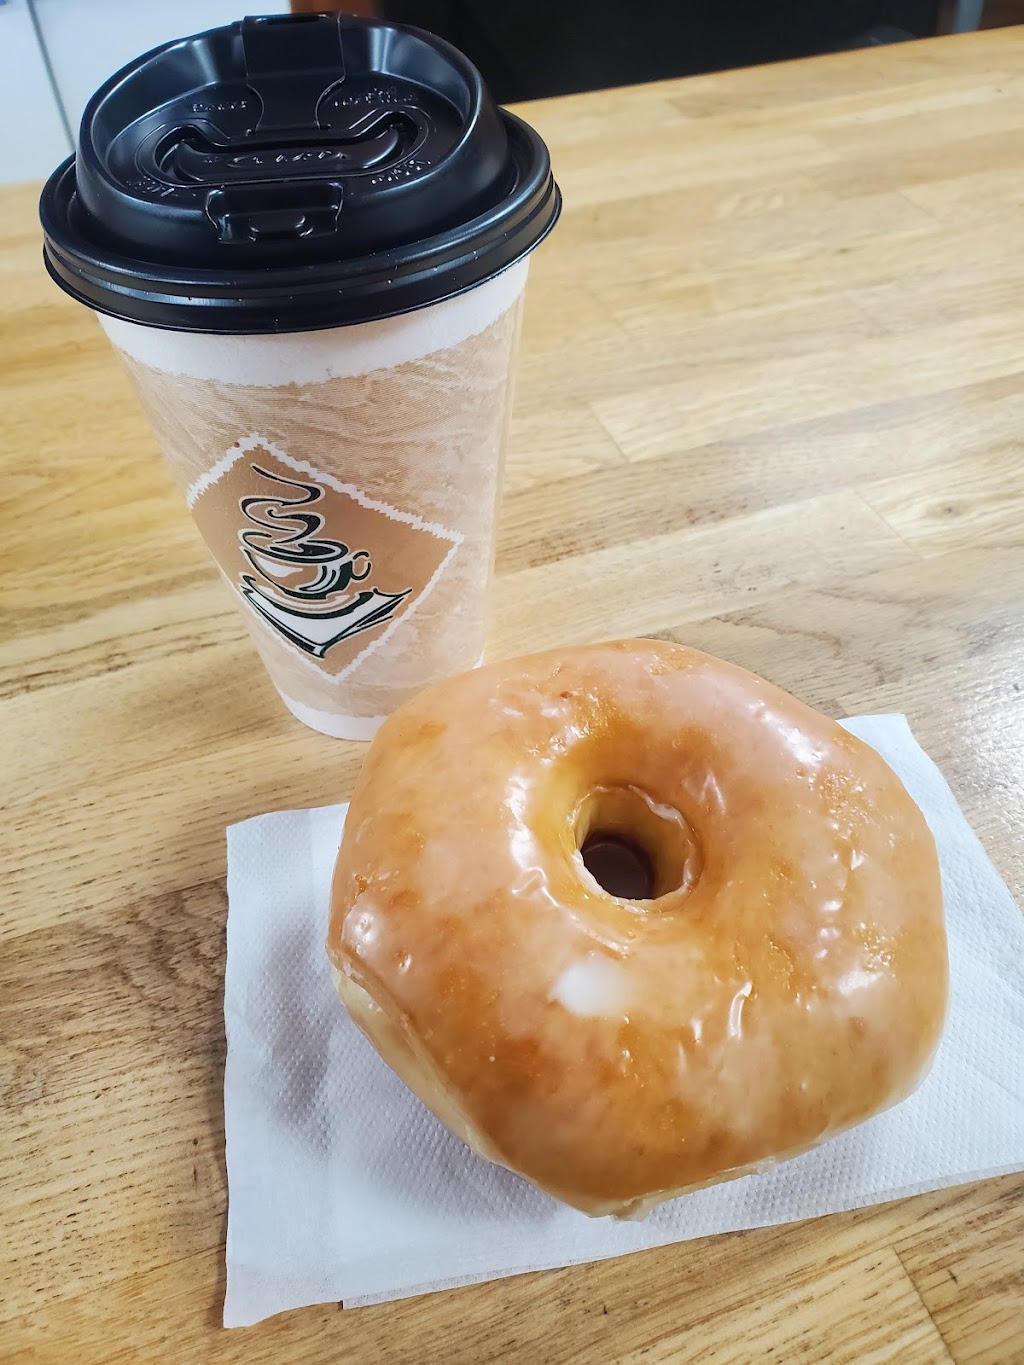 Spudnuts Donuts | Photo 5 of 10 | Address: 650 Prospect Rd, Berea, OH 44017, USA | Phone: (440) 234-4249